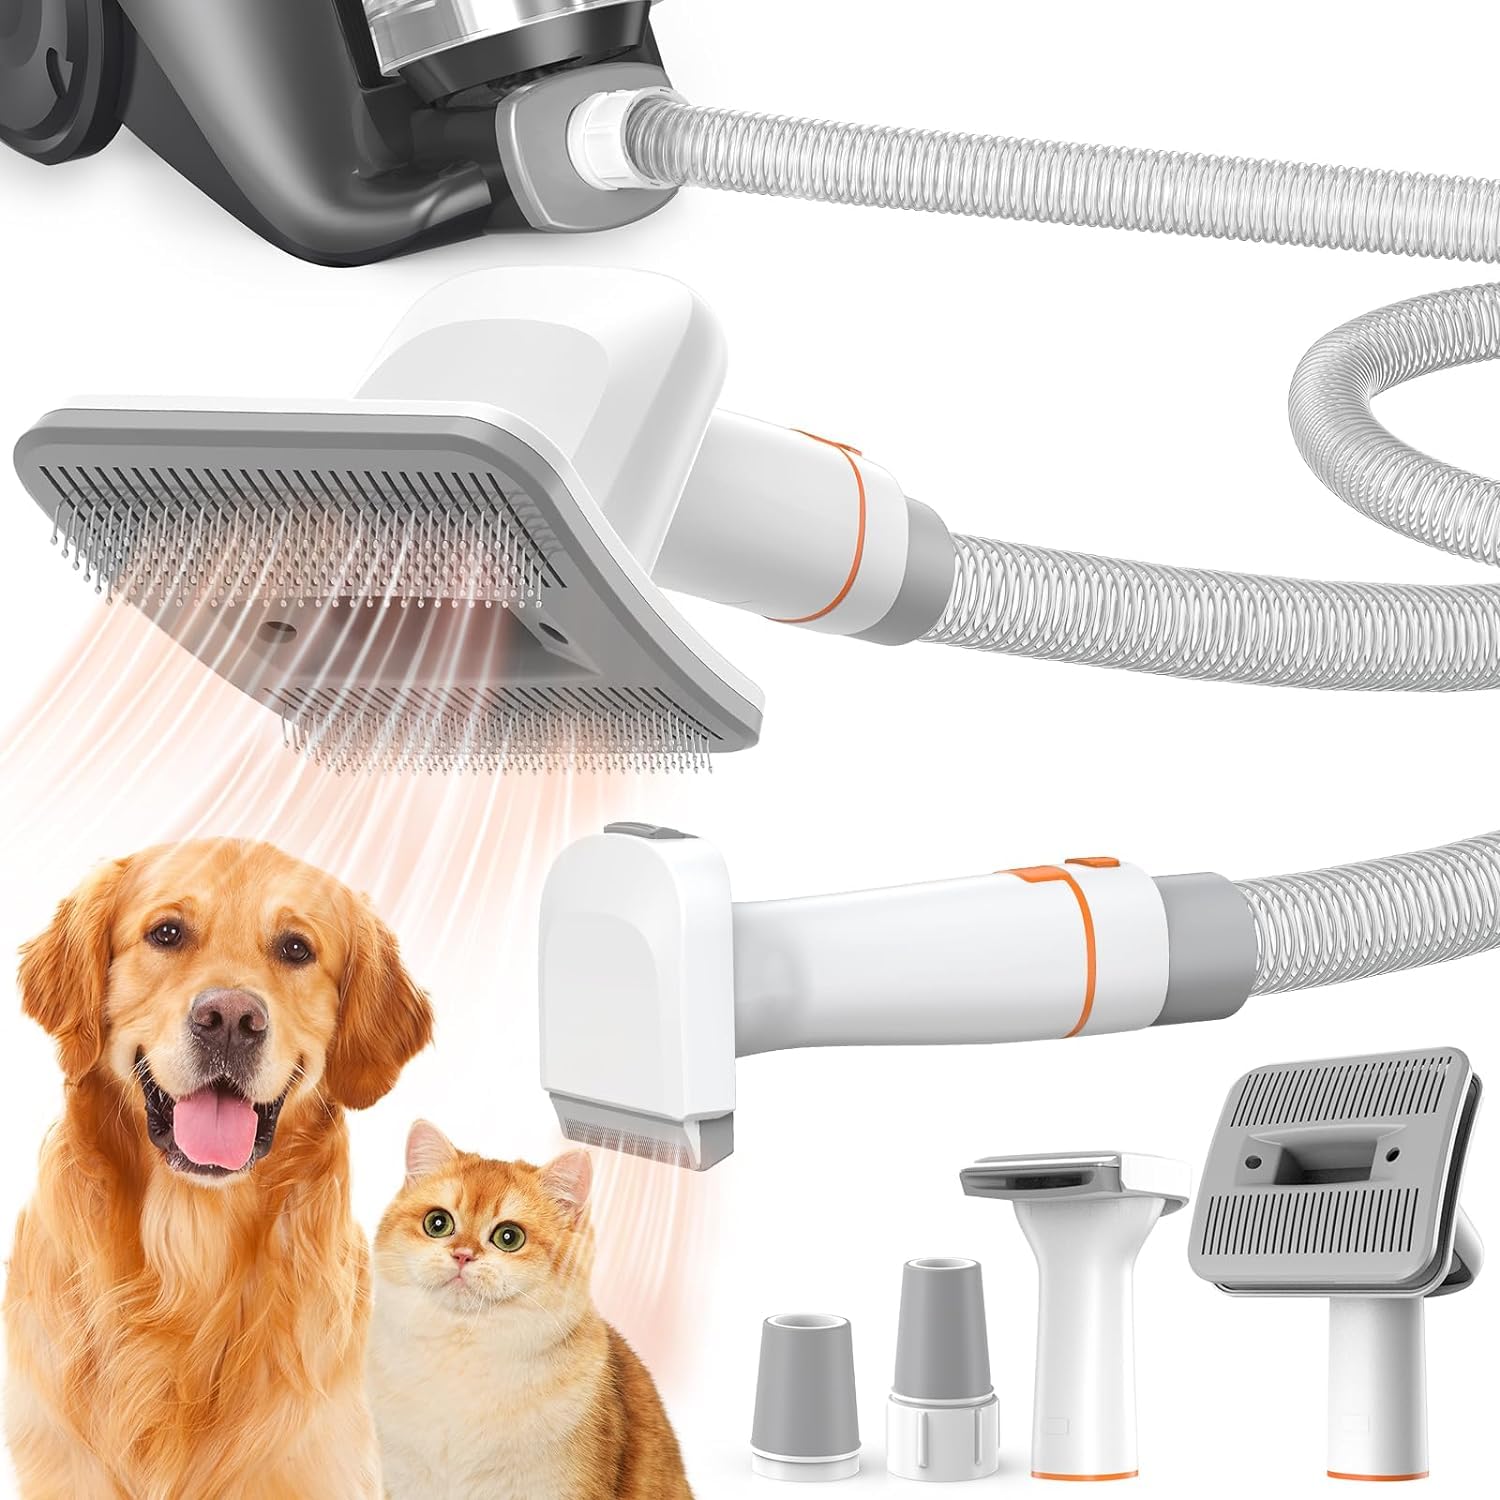 

Dog Brush Vacuum Attachment, Cat Brush, Pet Brush 2 In 1 Innovative Pet Grooming Kit 1-1.5'' Hoses Diameter Universal Adapter Compatible With Most Round Vacuum Cleaners Like , Eureka Etc